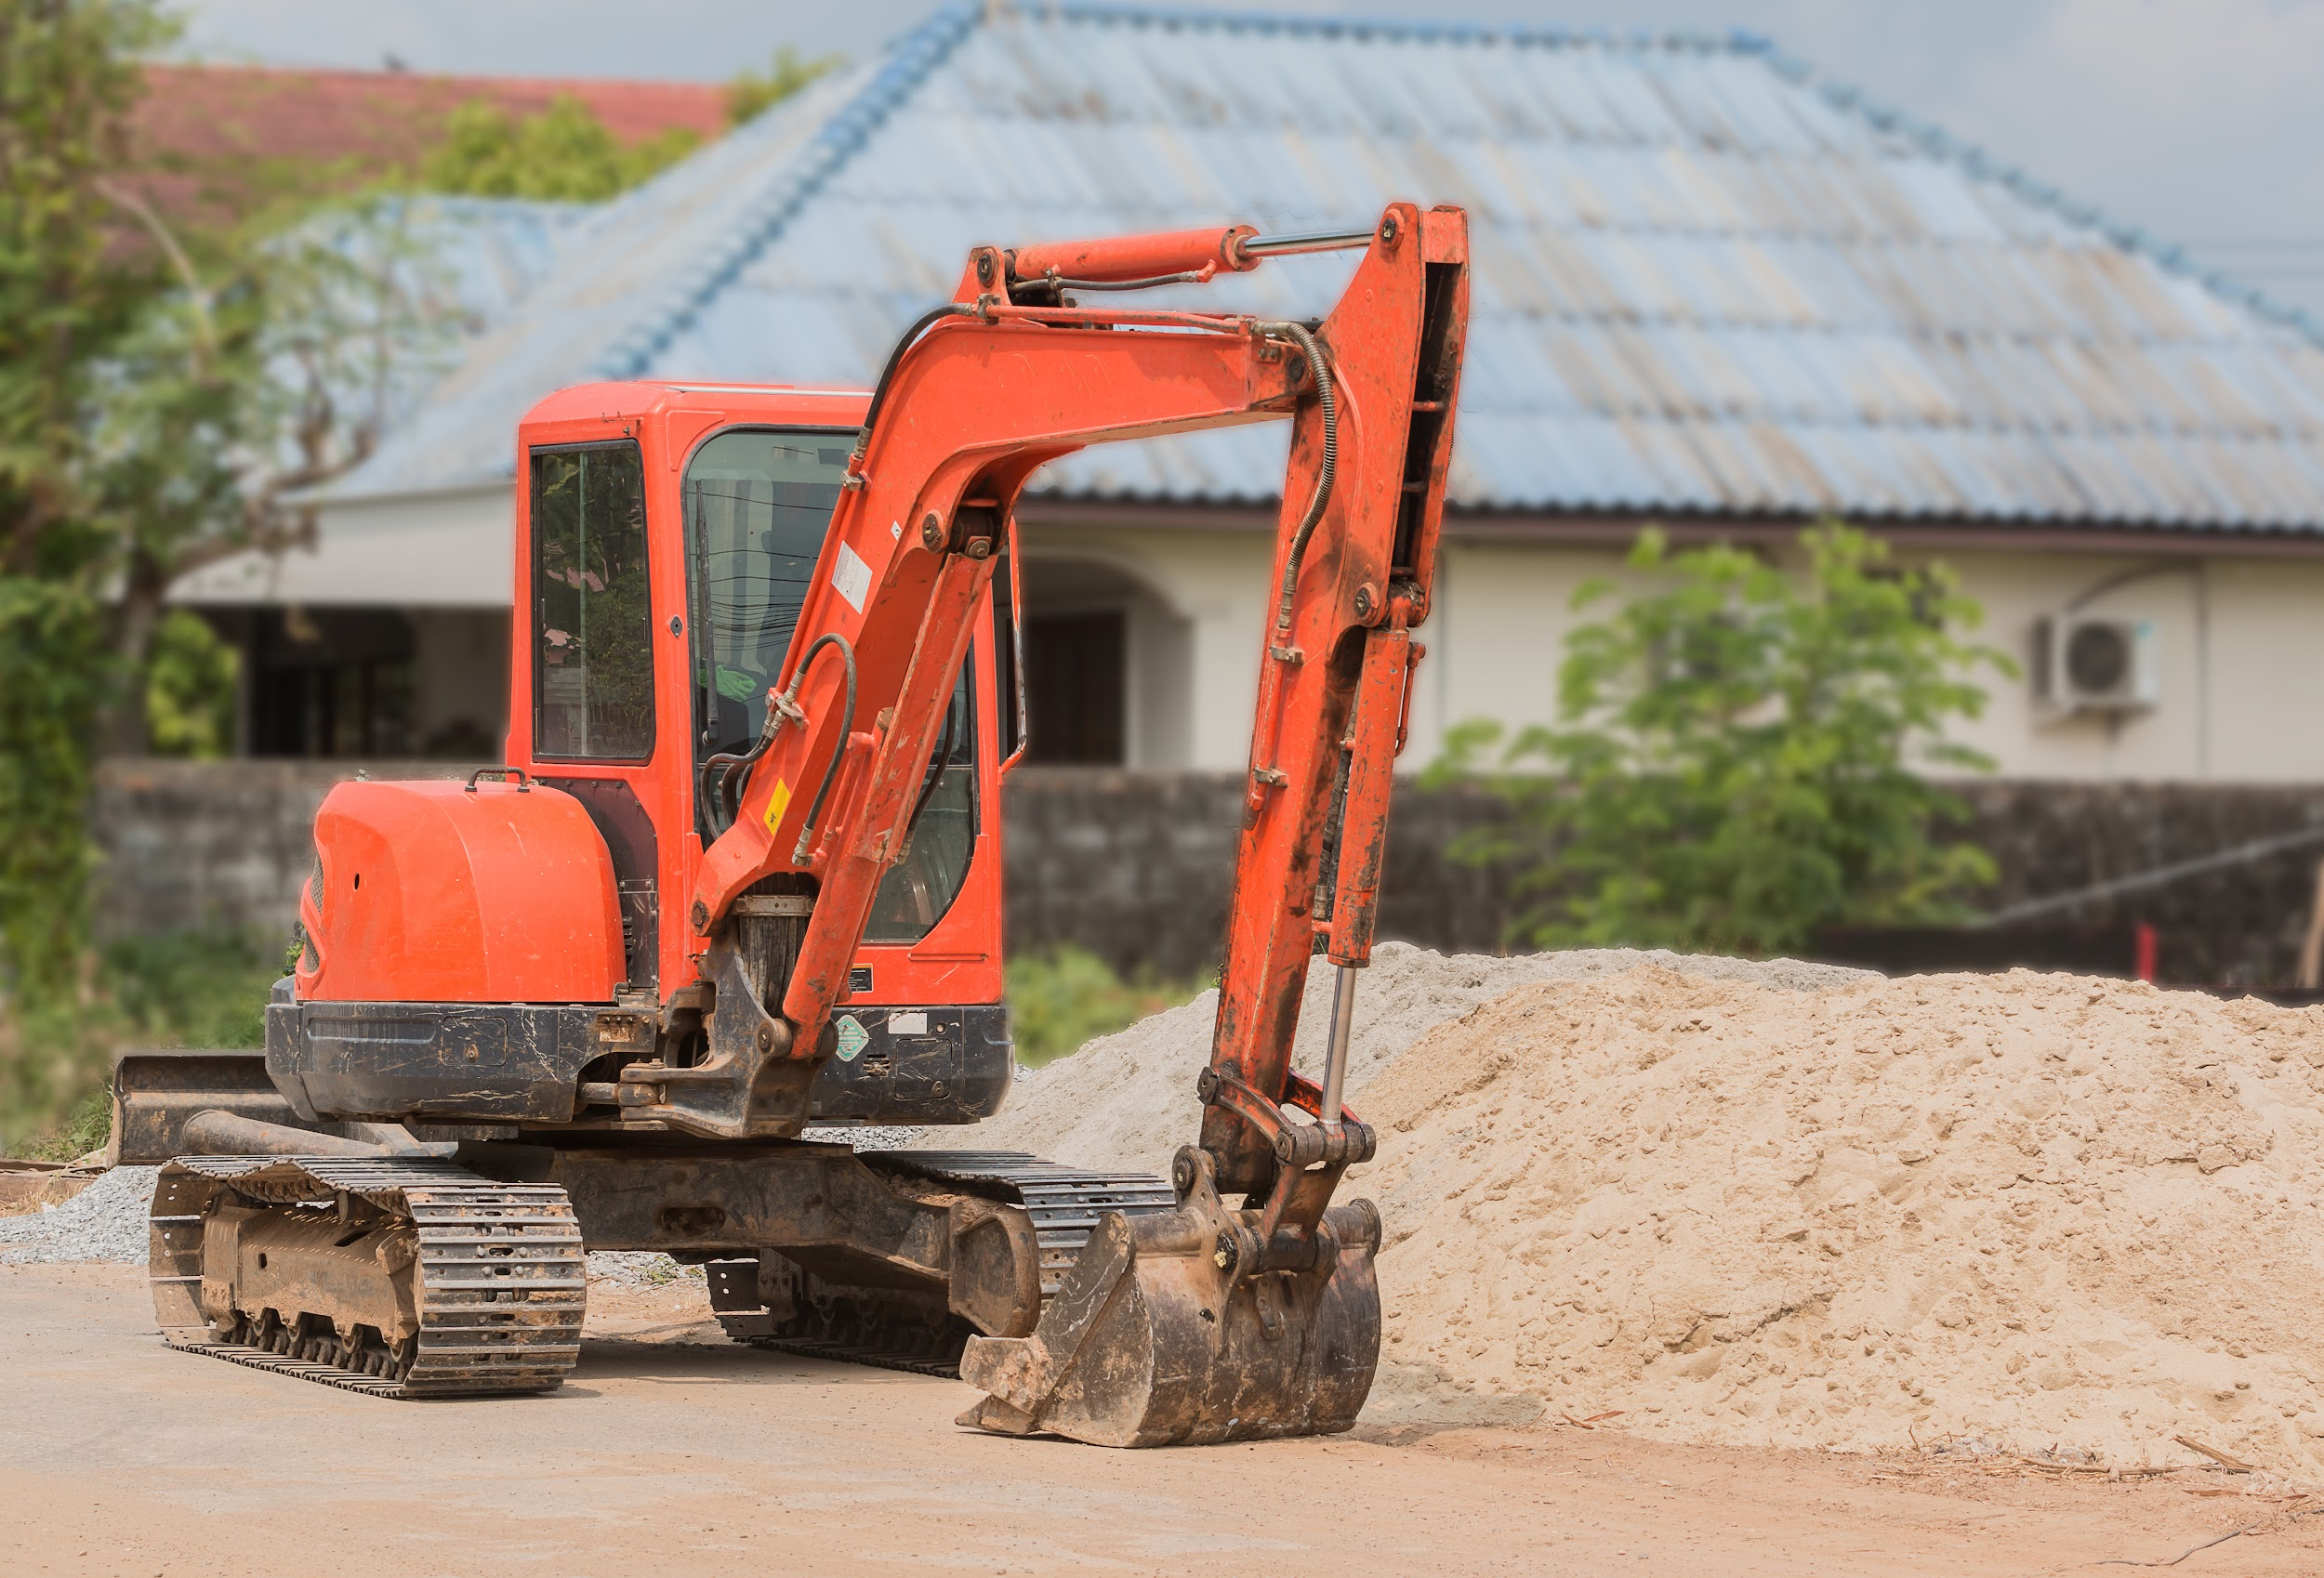 Why You Should Dry Hire an Excavator Instead of Buying One